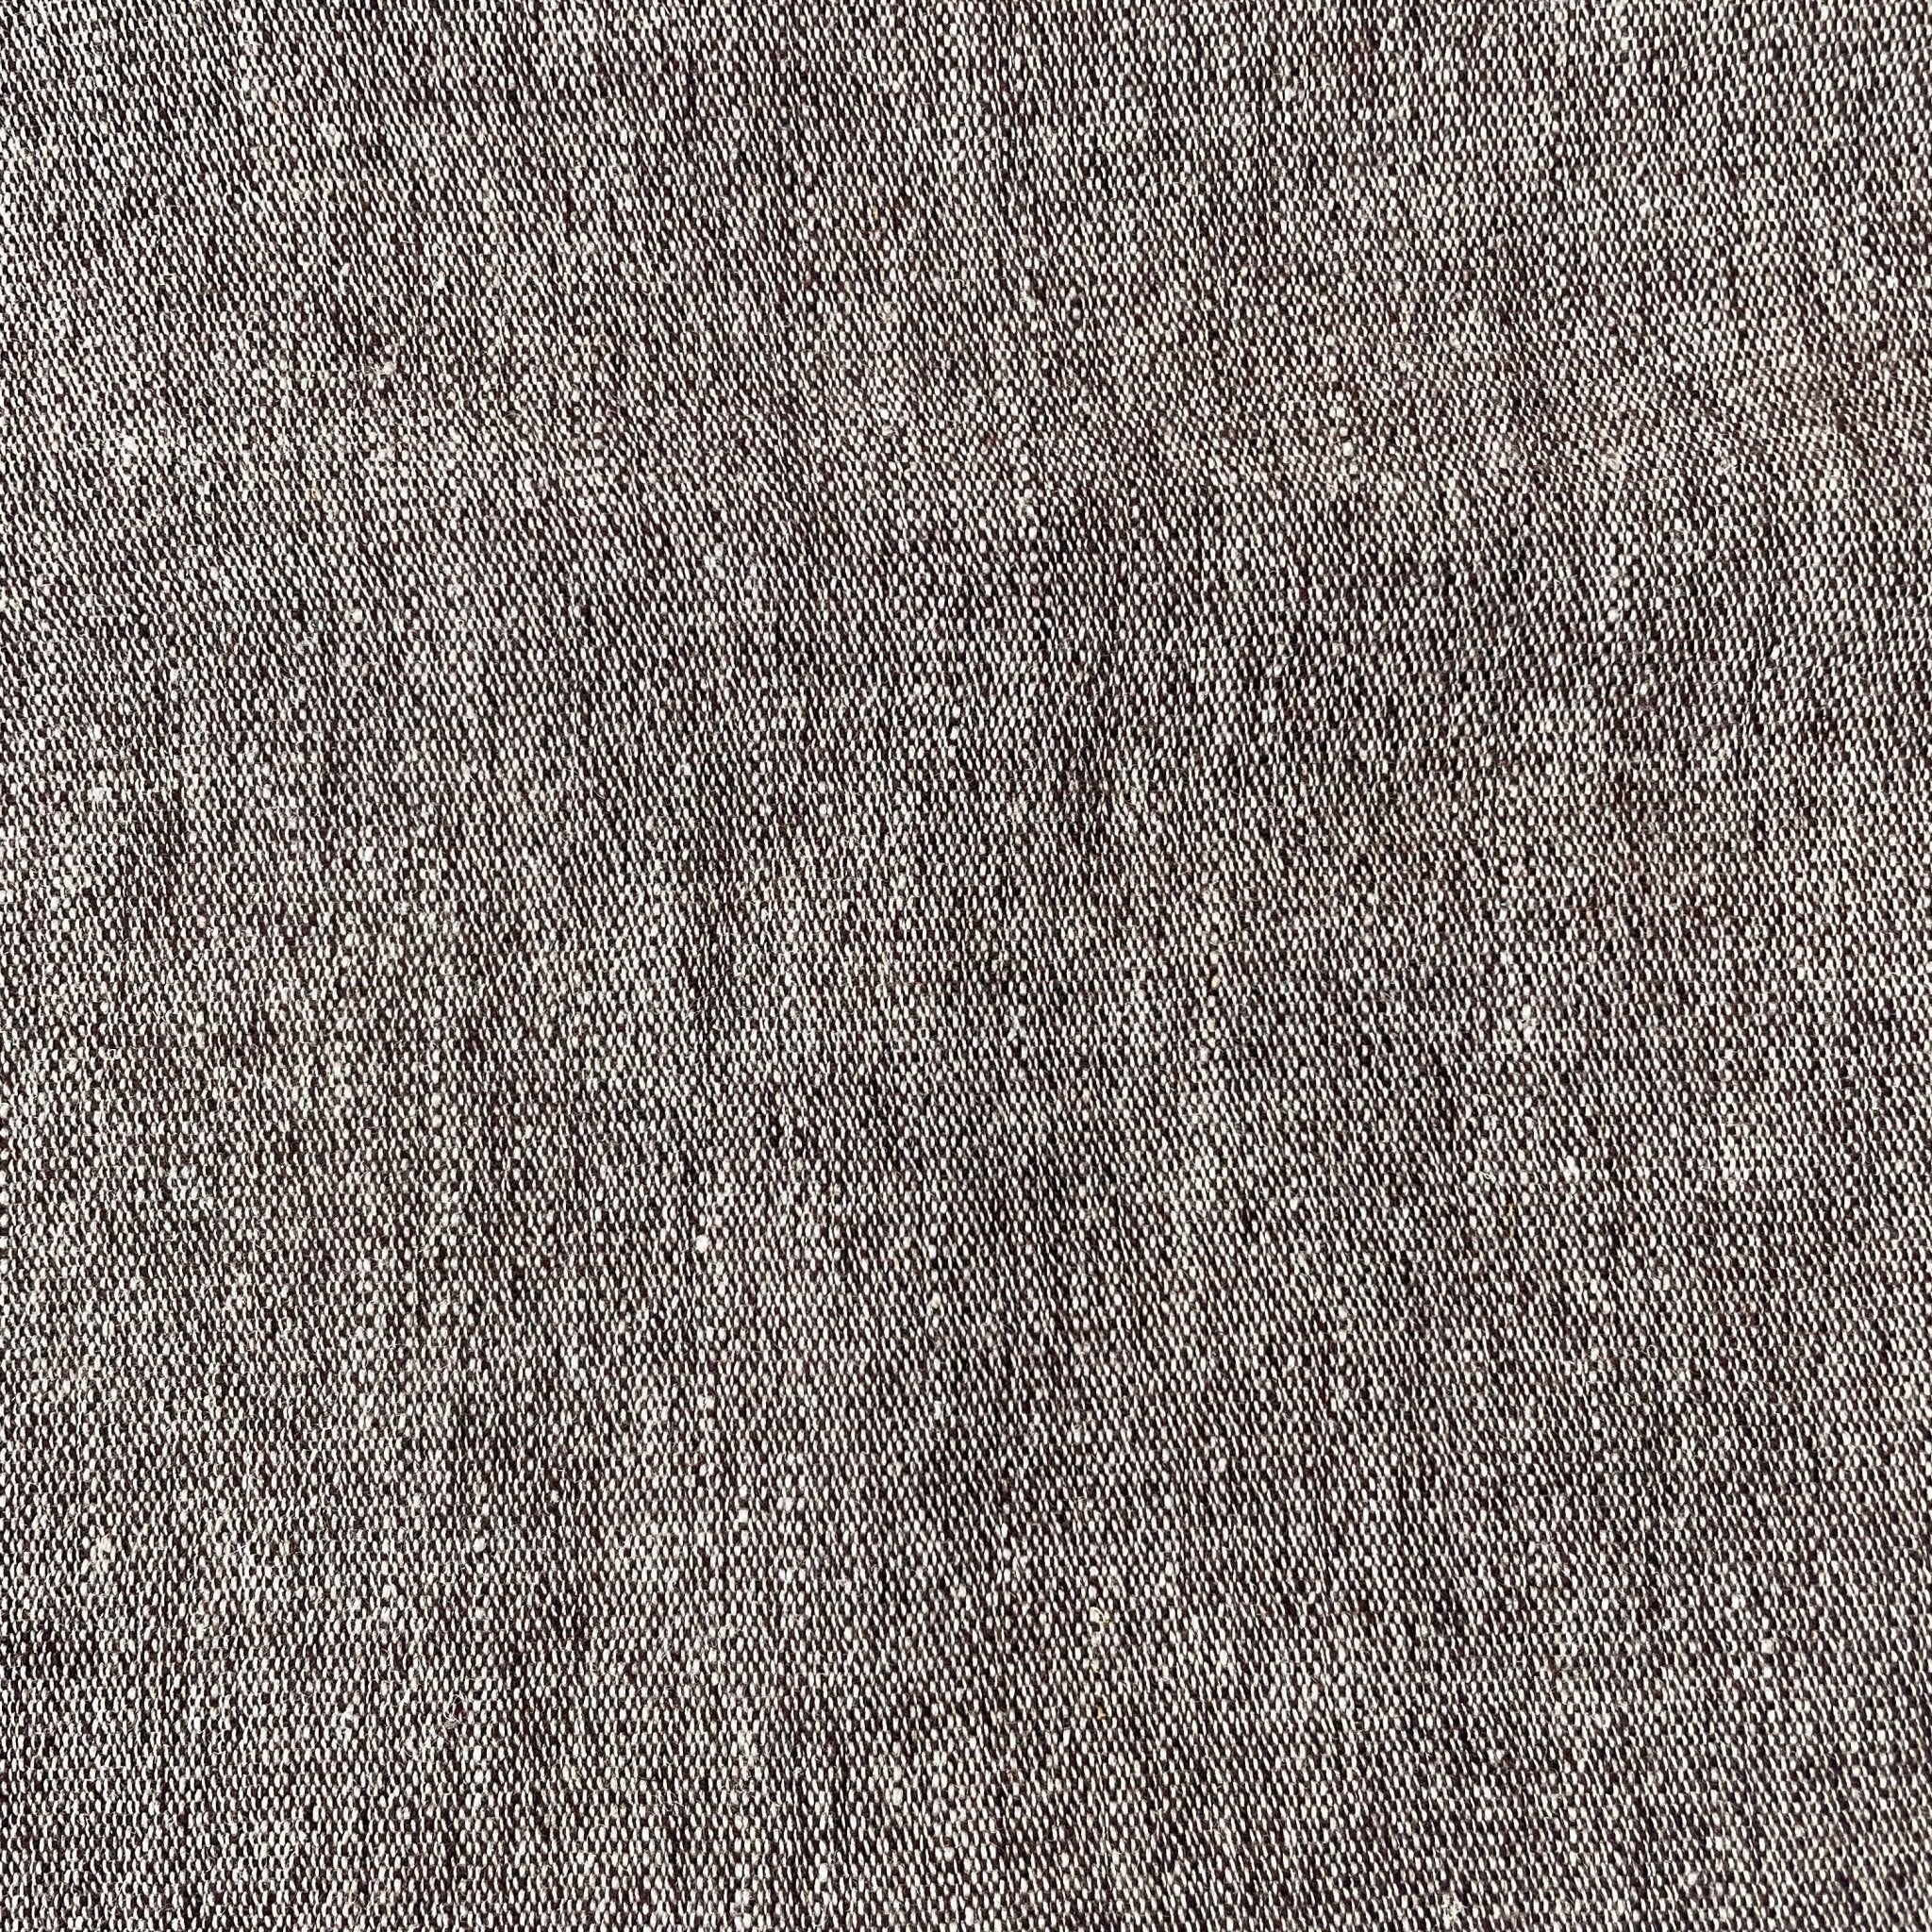 Linen Wool Fabric 6105 6106 6107 - The Linen Lab - Brown